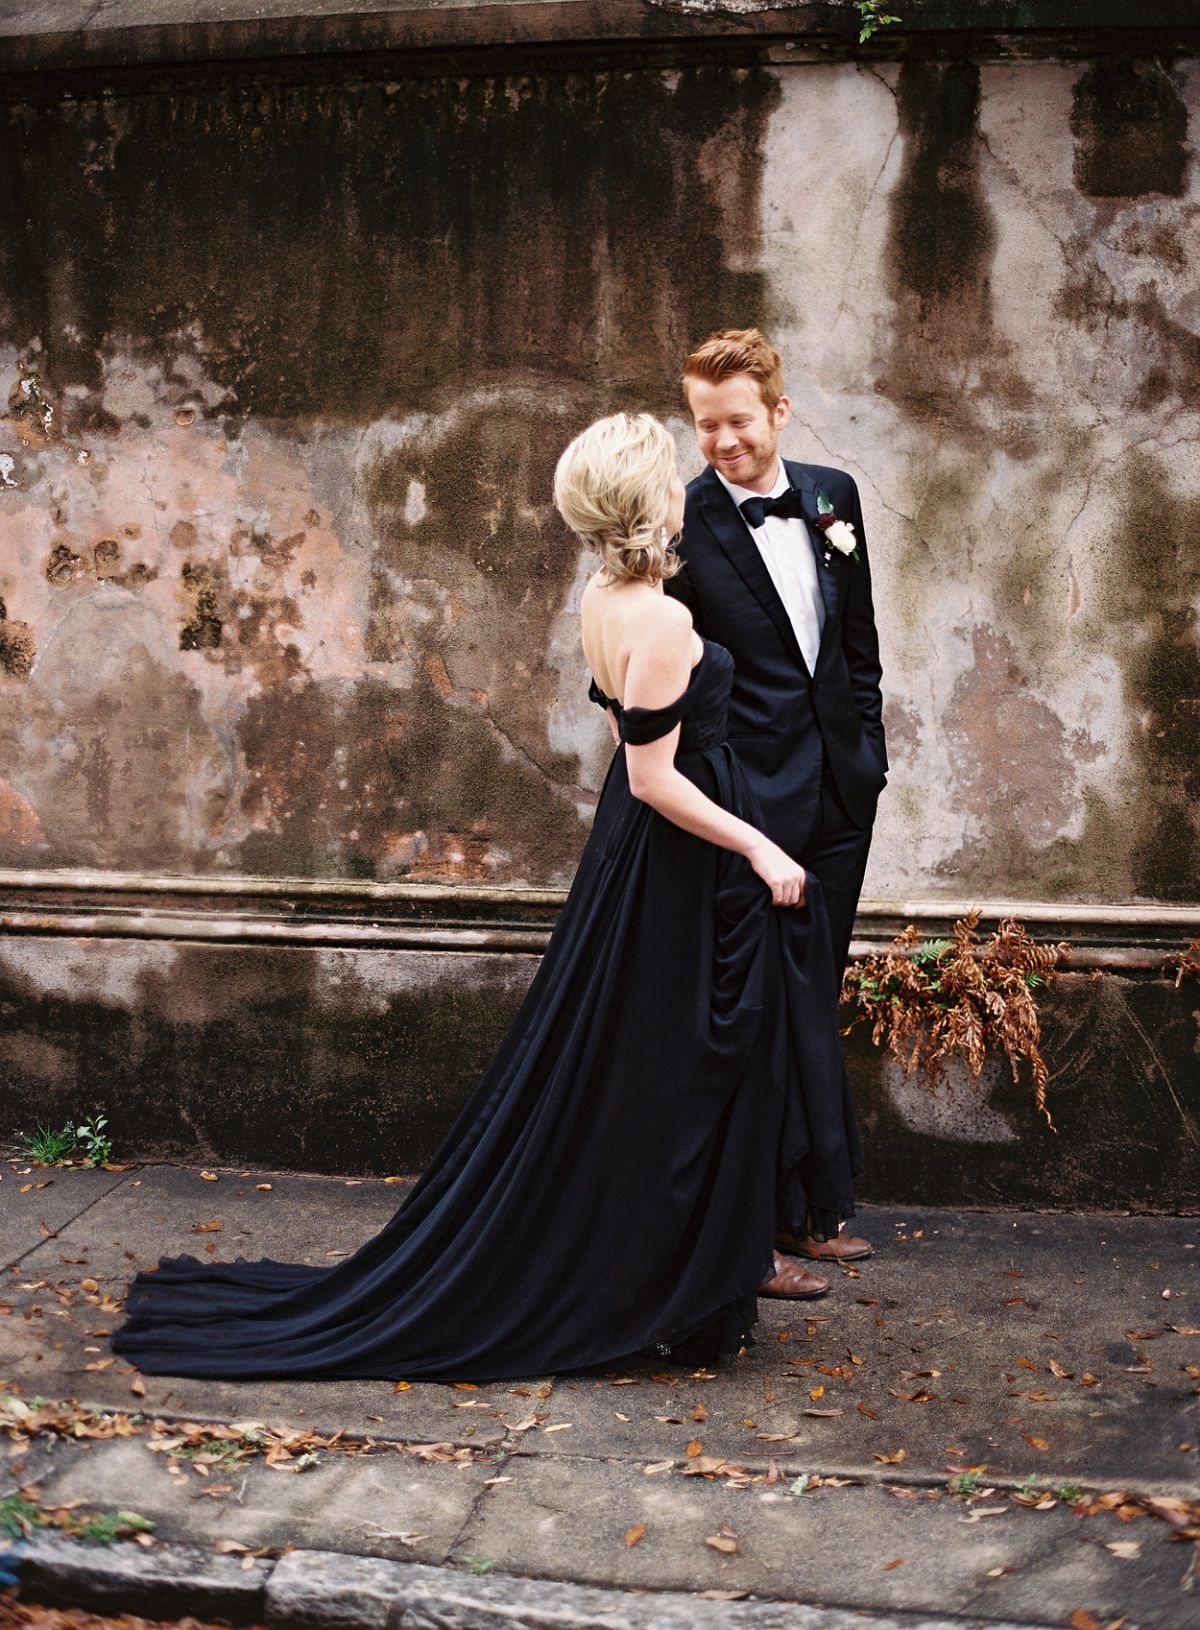 Love her black gown and his fancy tuxedo. Photo by Ashley Cox // Don't know what to wear for your engagement pictures? Check out these 10 Formal Engagement Photo Outfit Ideas. // http://mysweetengagement.com